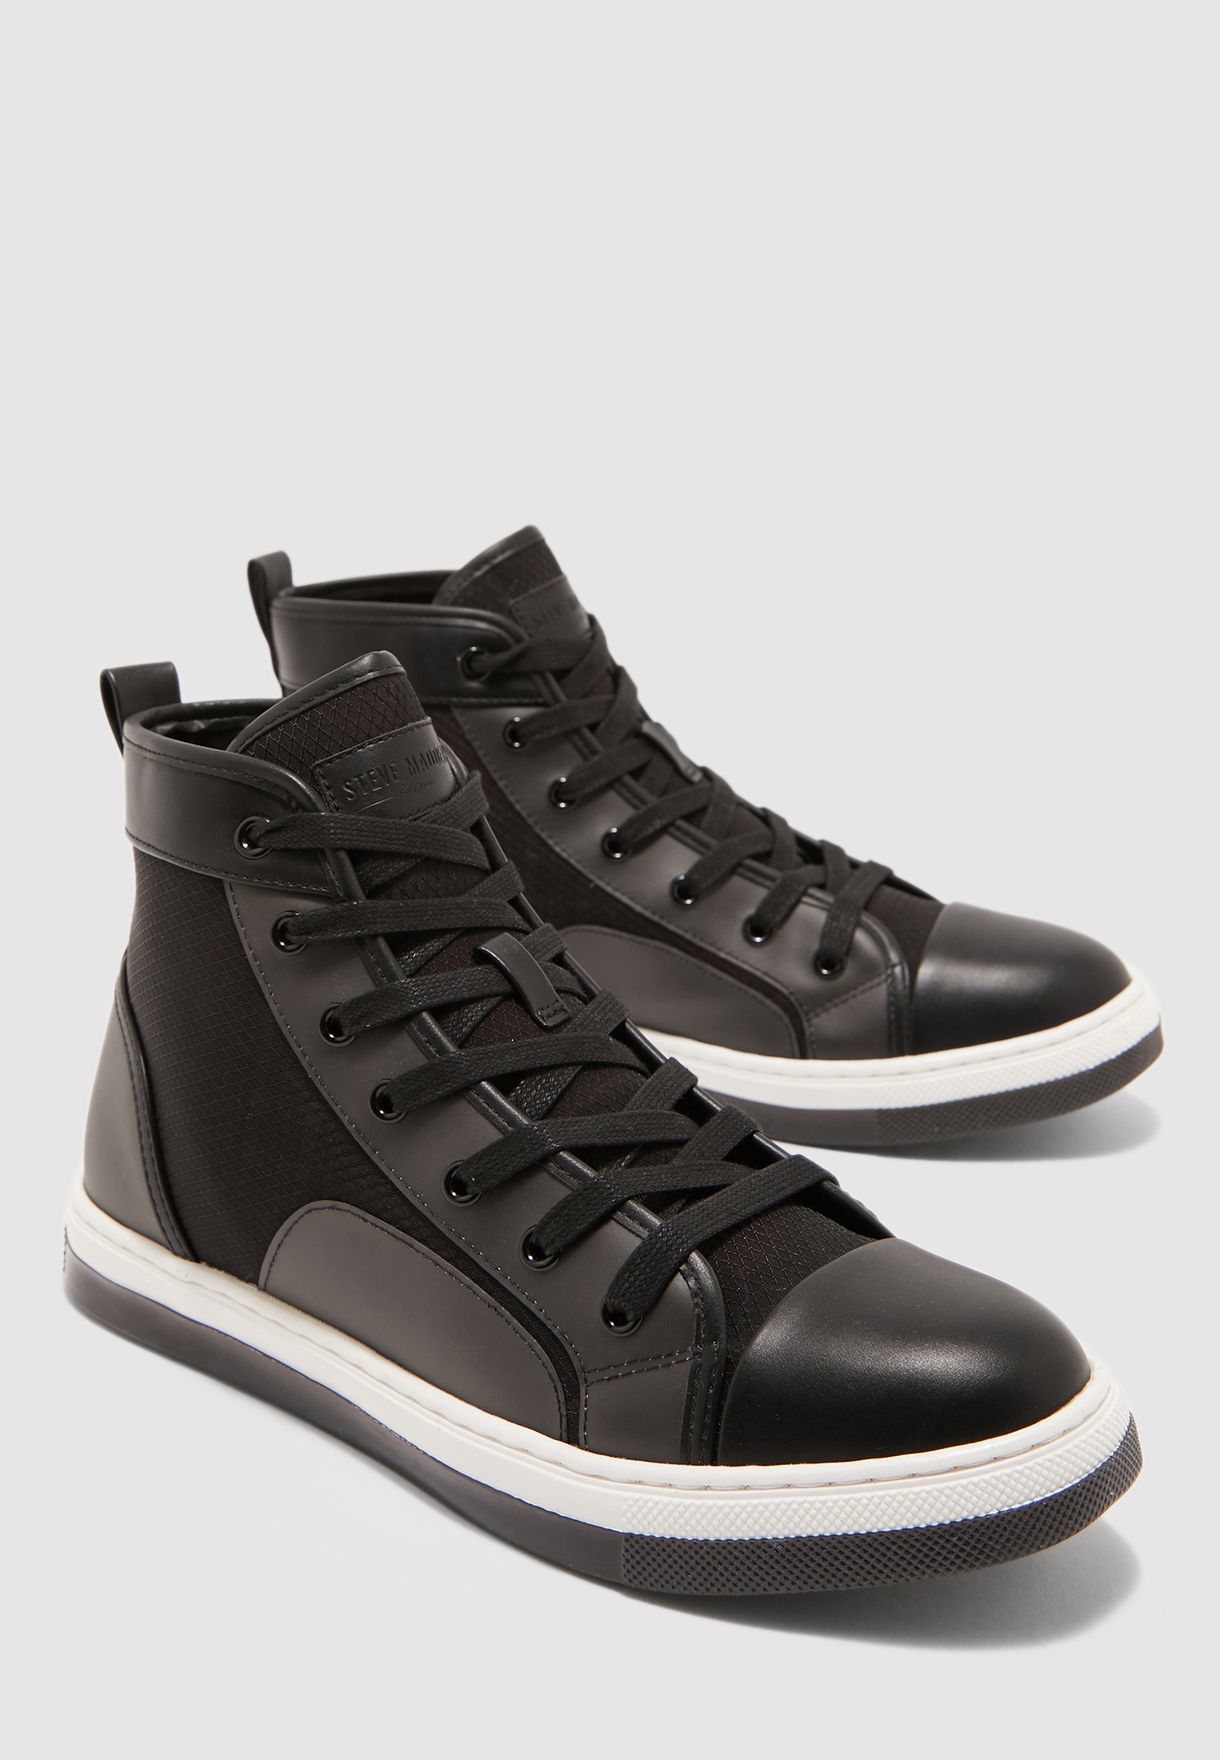 steve madden black casual shoes